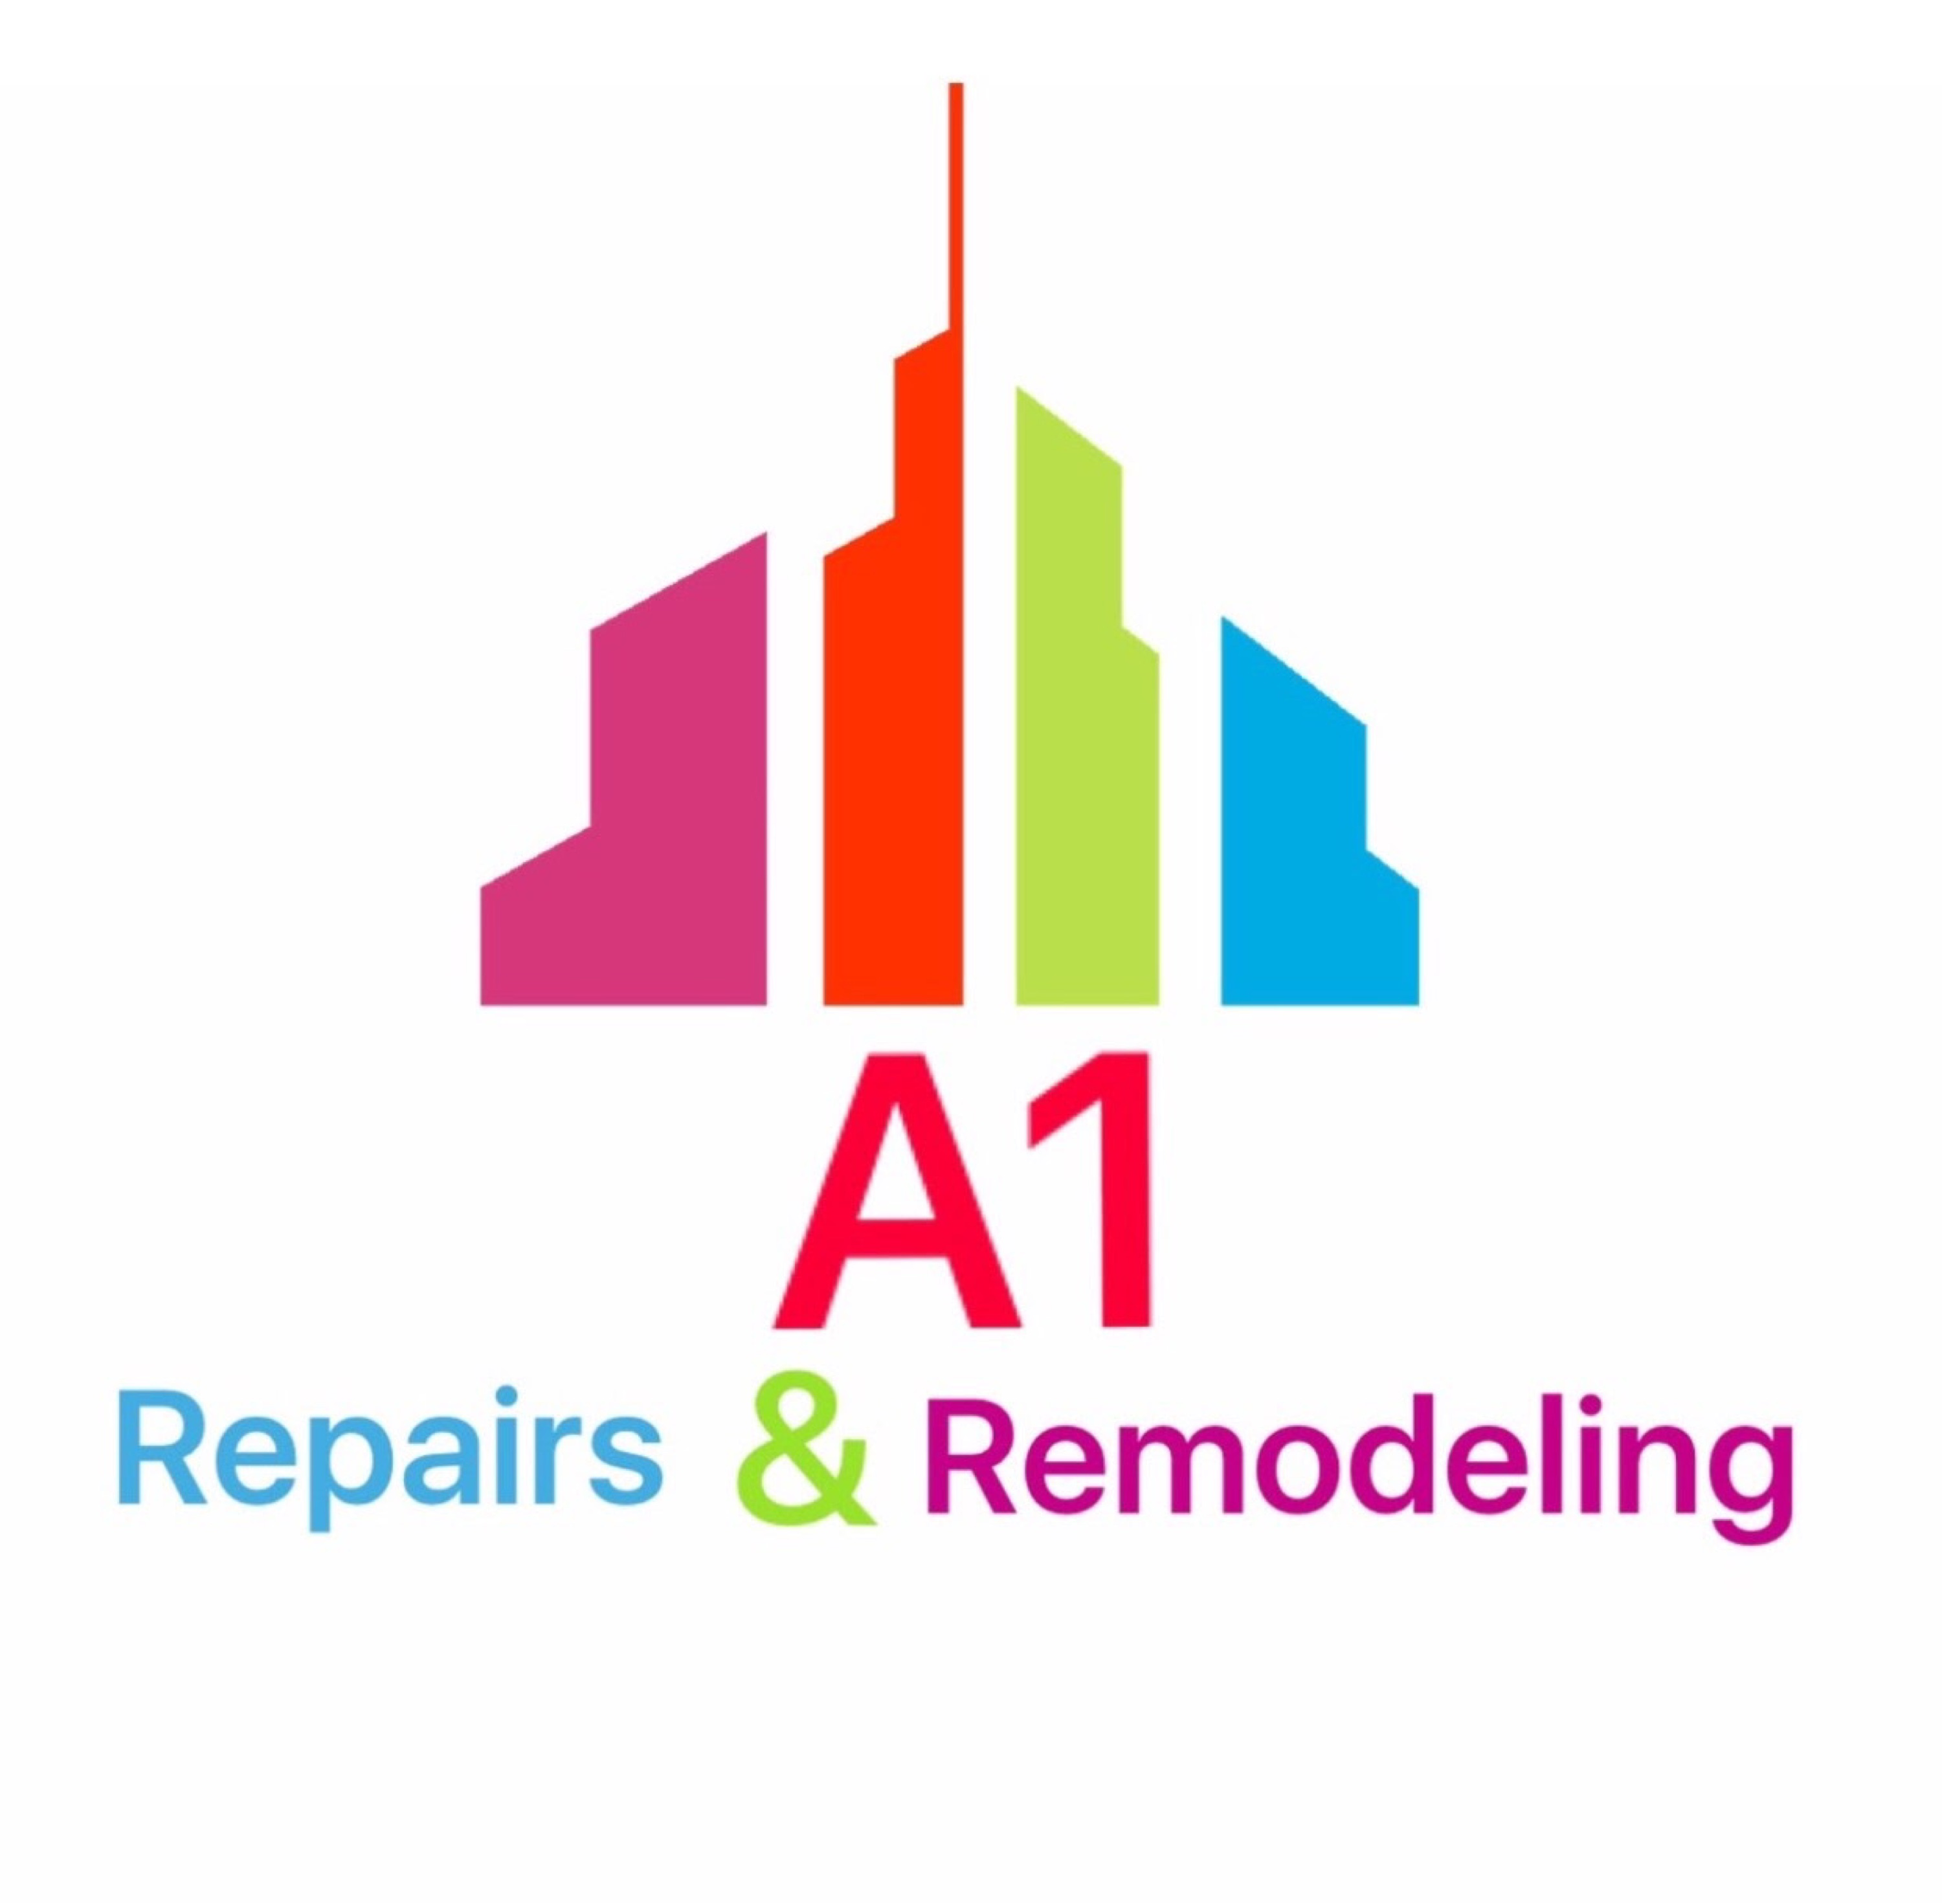 A1 Repairs and Remodeling Logo